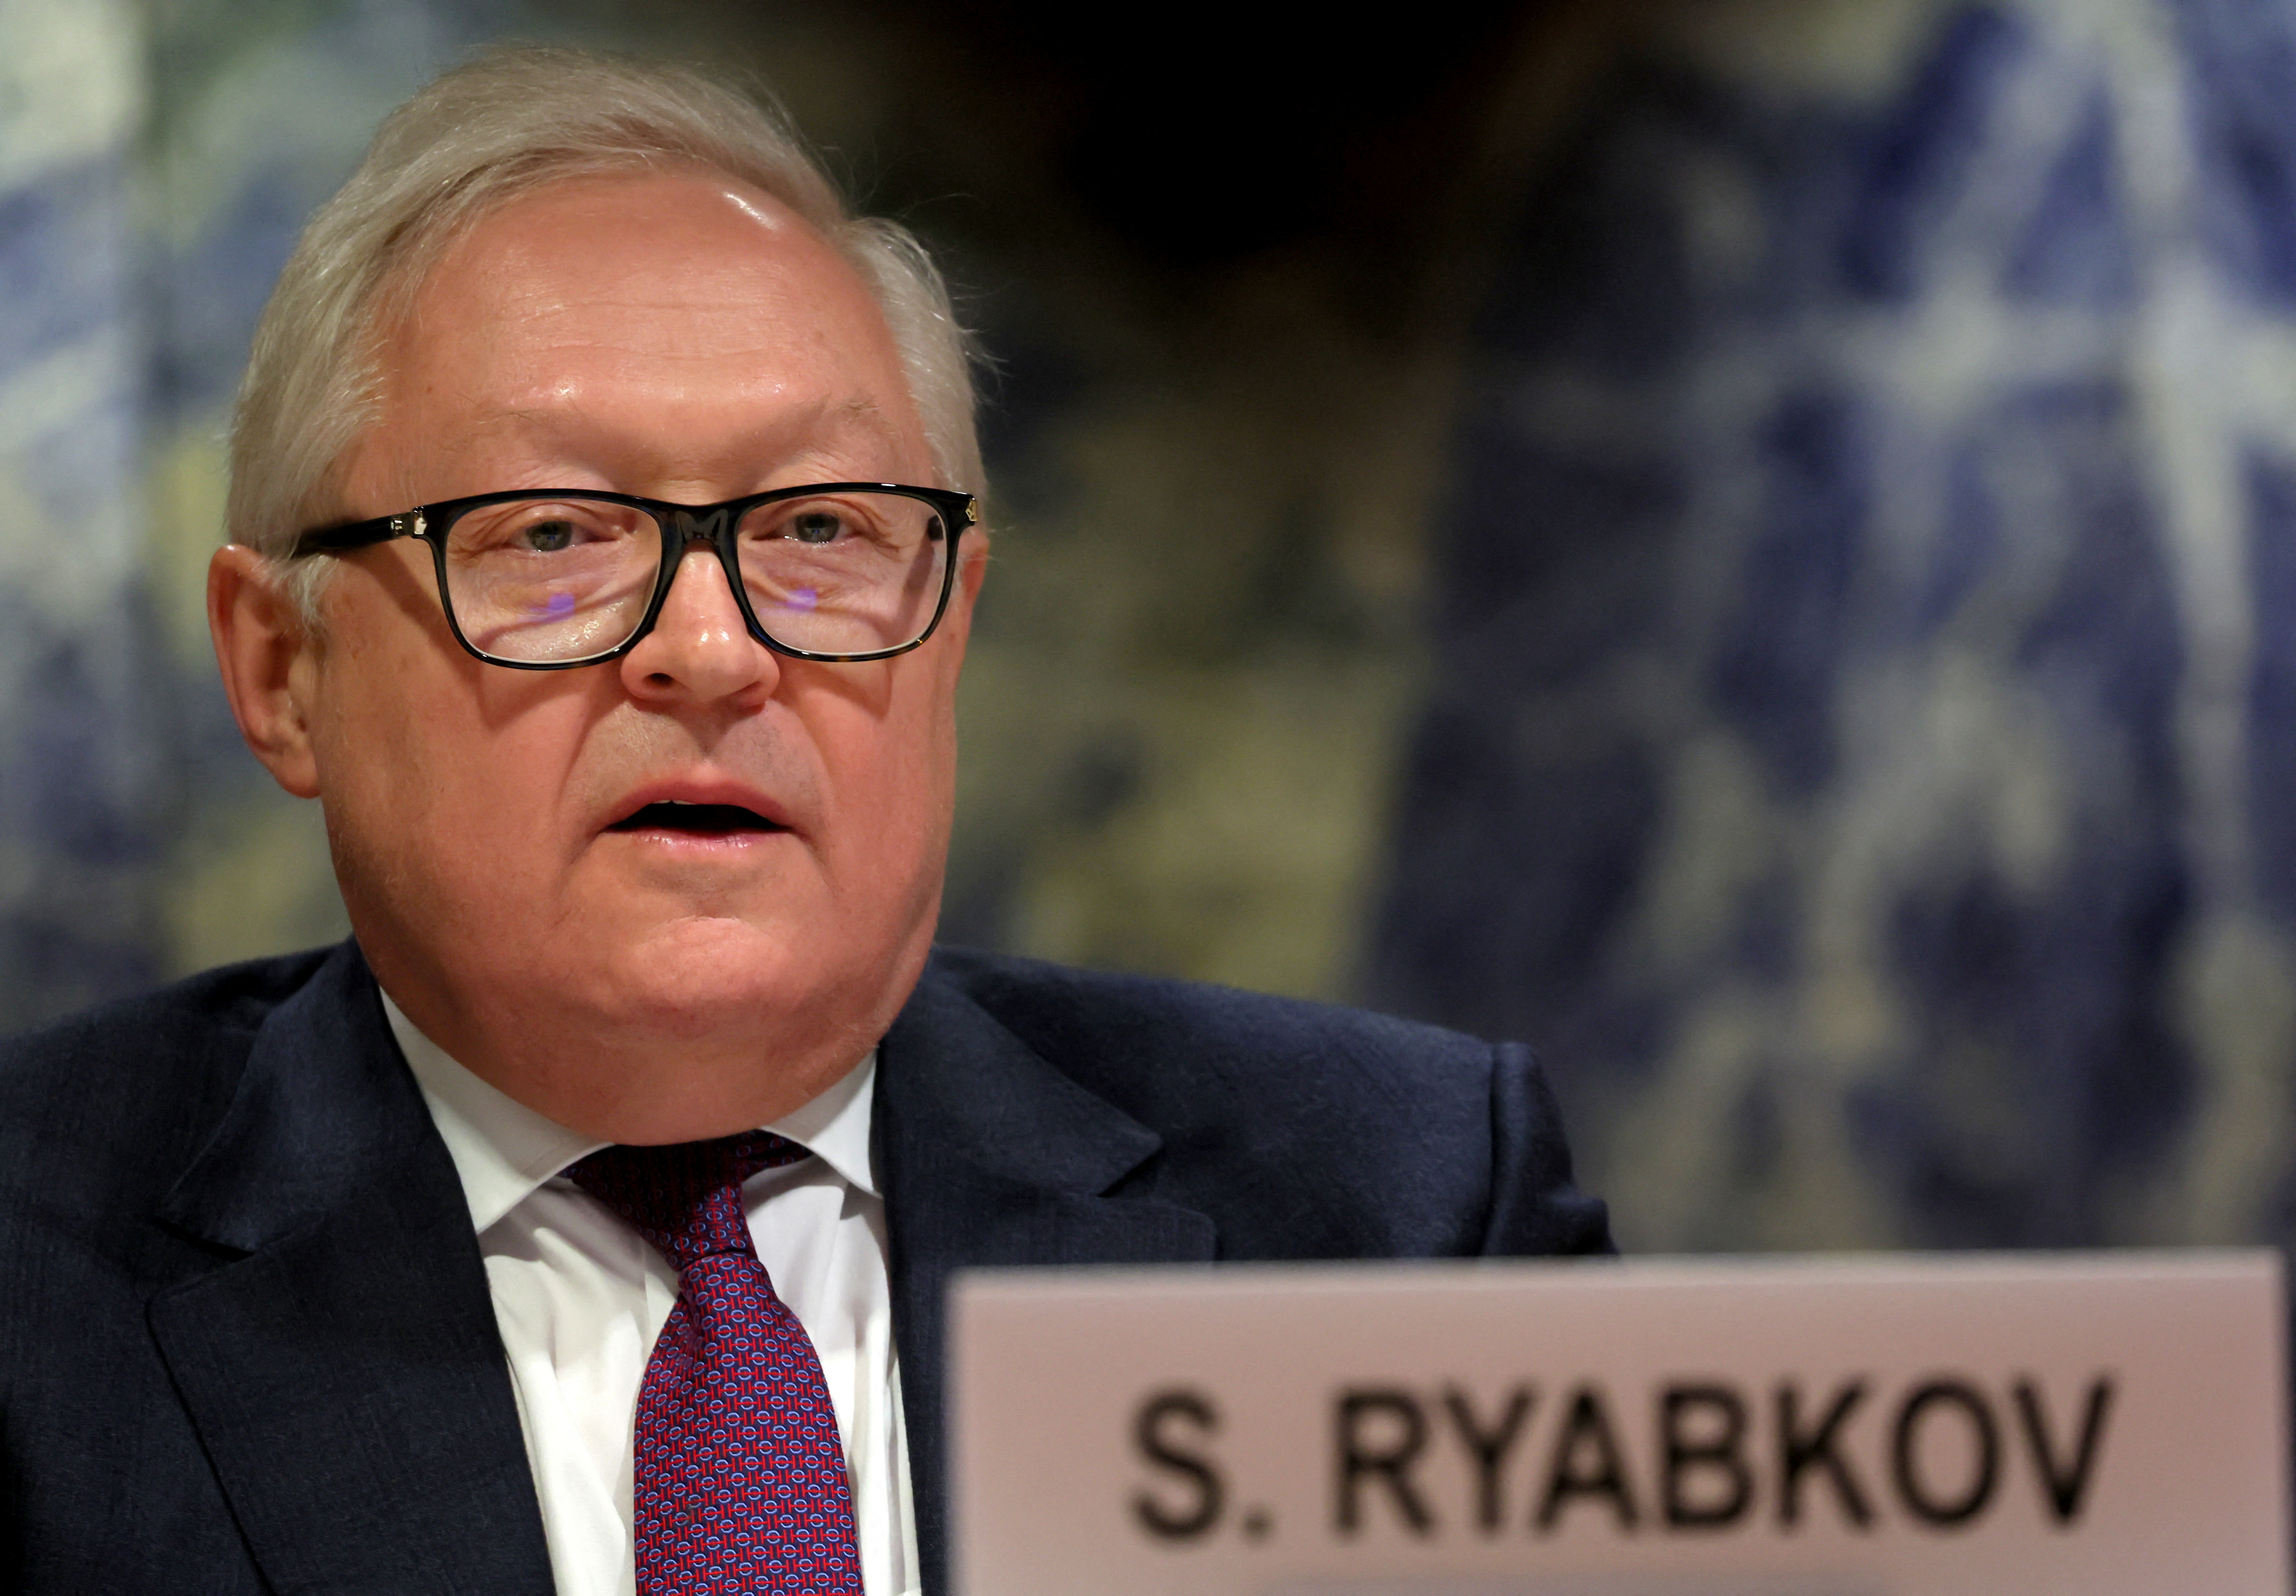 Russian Deputy Foreign Minister Ryabkov attends the Conference on Disarmament in Geneva